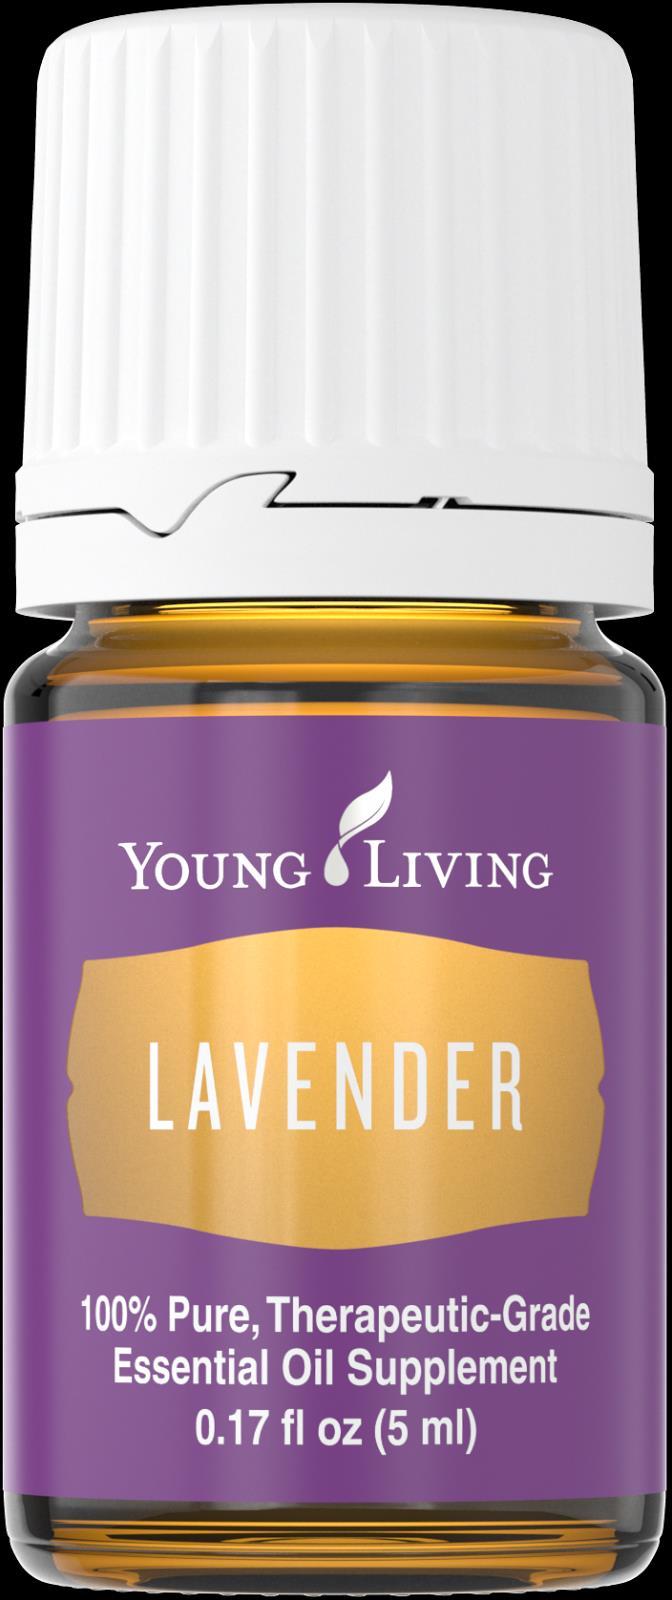 Lavender Essential Oil Reduces anxiety and emotional stress Heals burns and wounds Improves sleep Restores skin